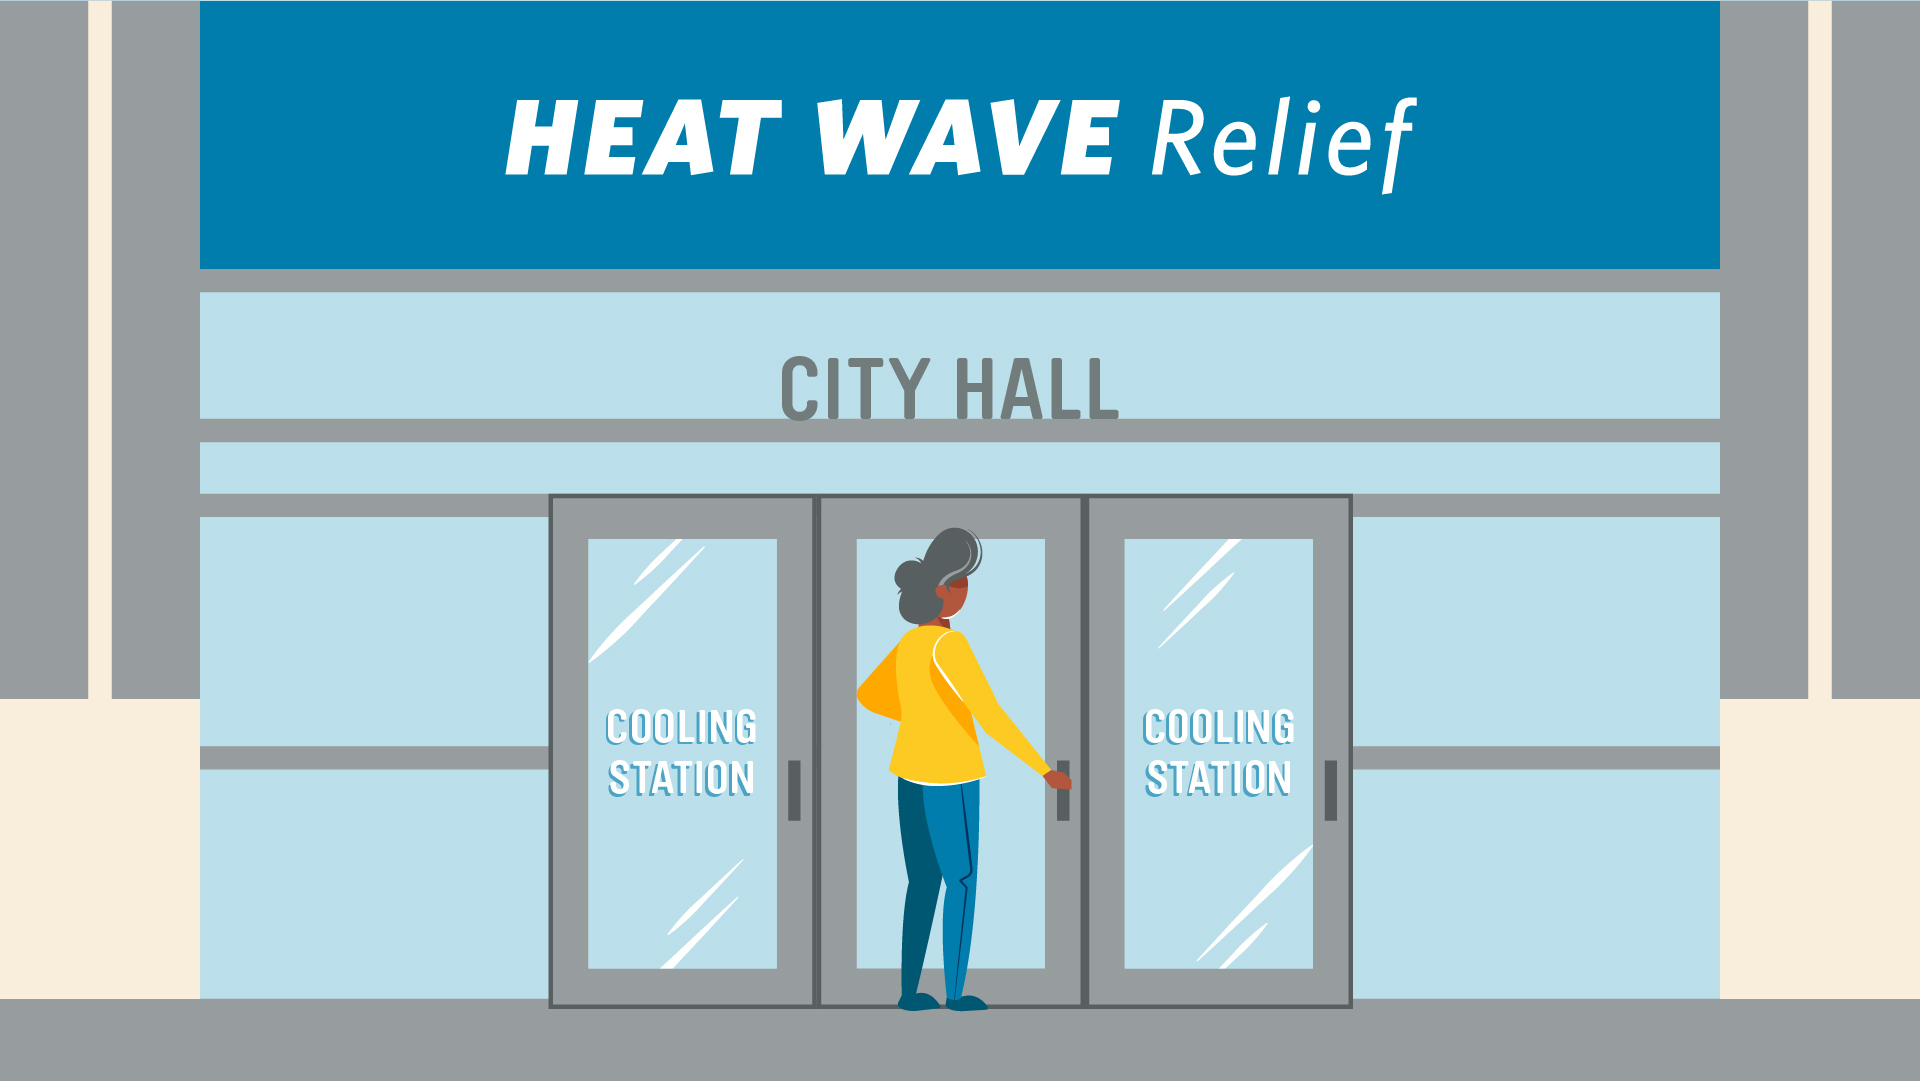 City Hall as a Cooling Center graphic